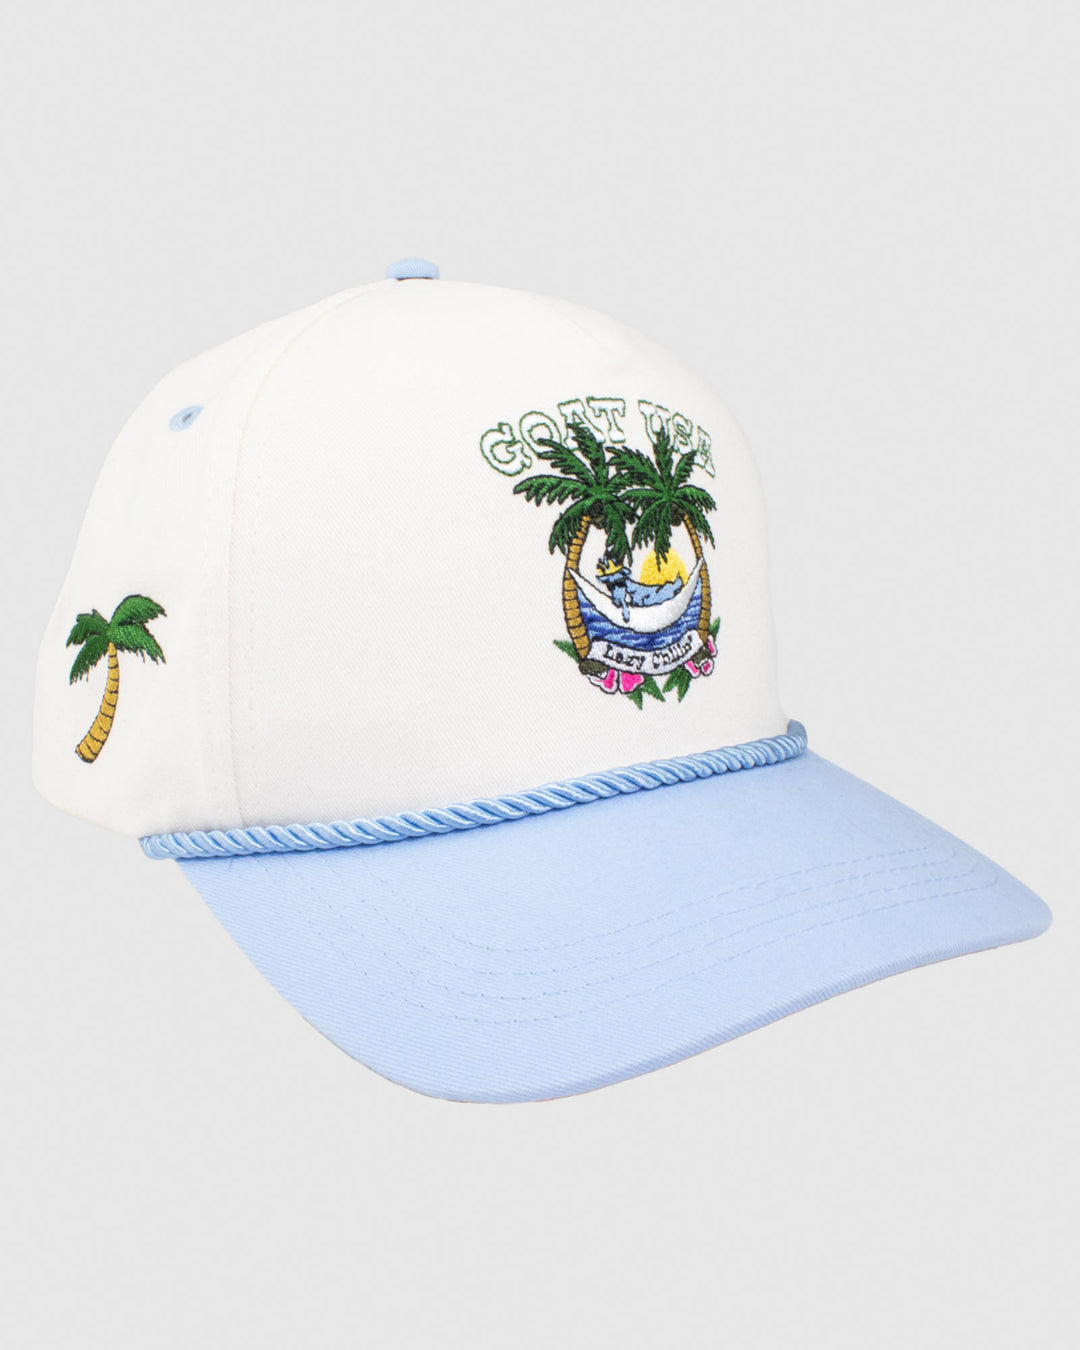 Cream hat with blue rope and brim. Features a palm tree sunset design